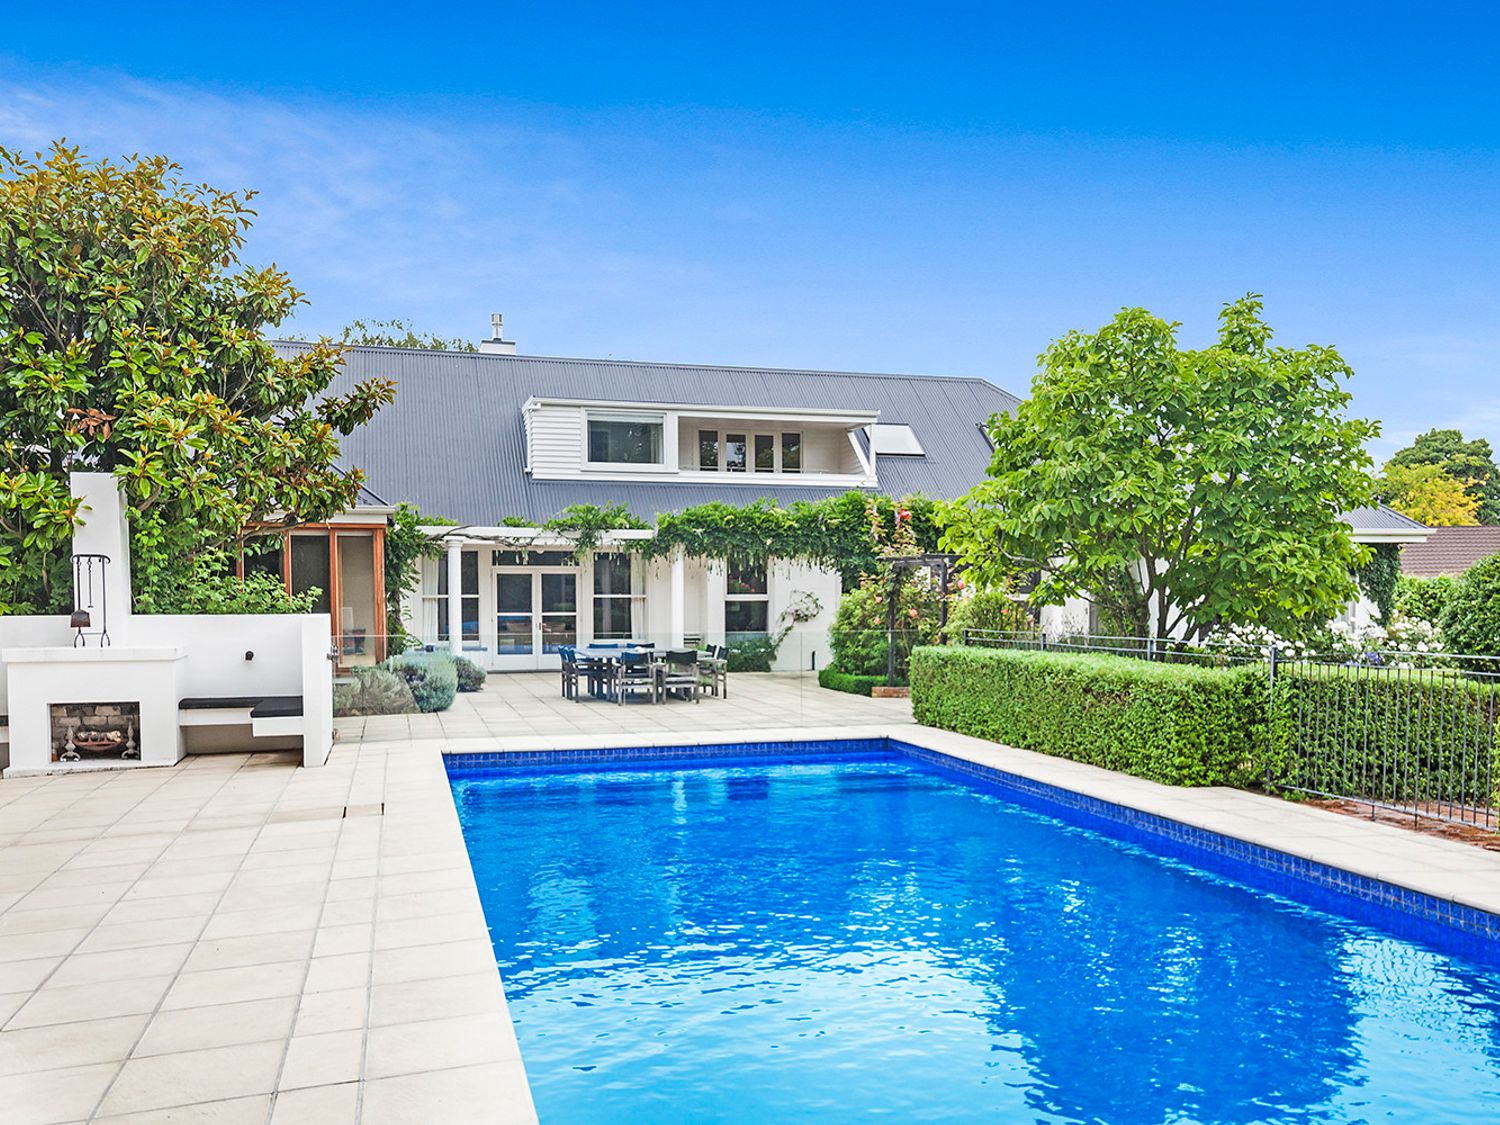 French City Mansion - Christchurch Luxury Home -  - 1032478 - photo 1